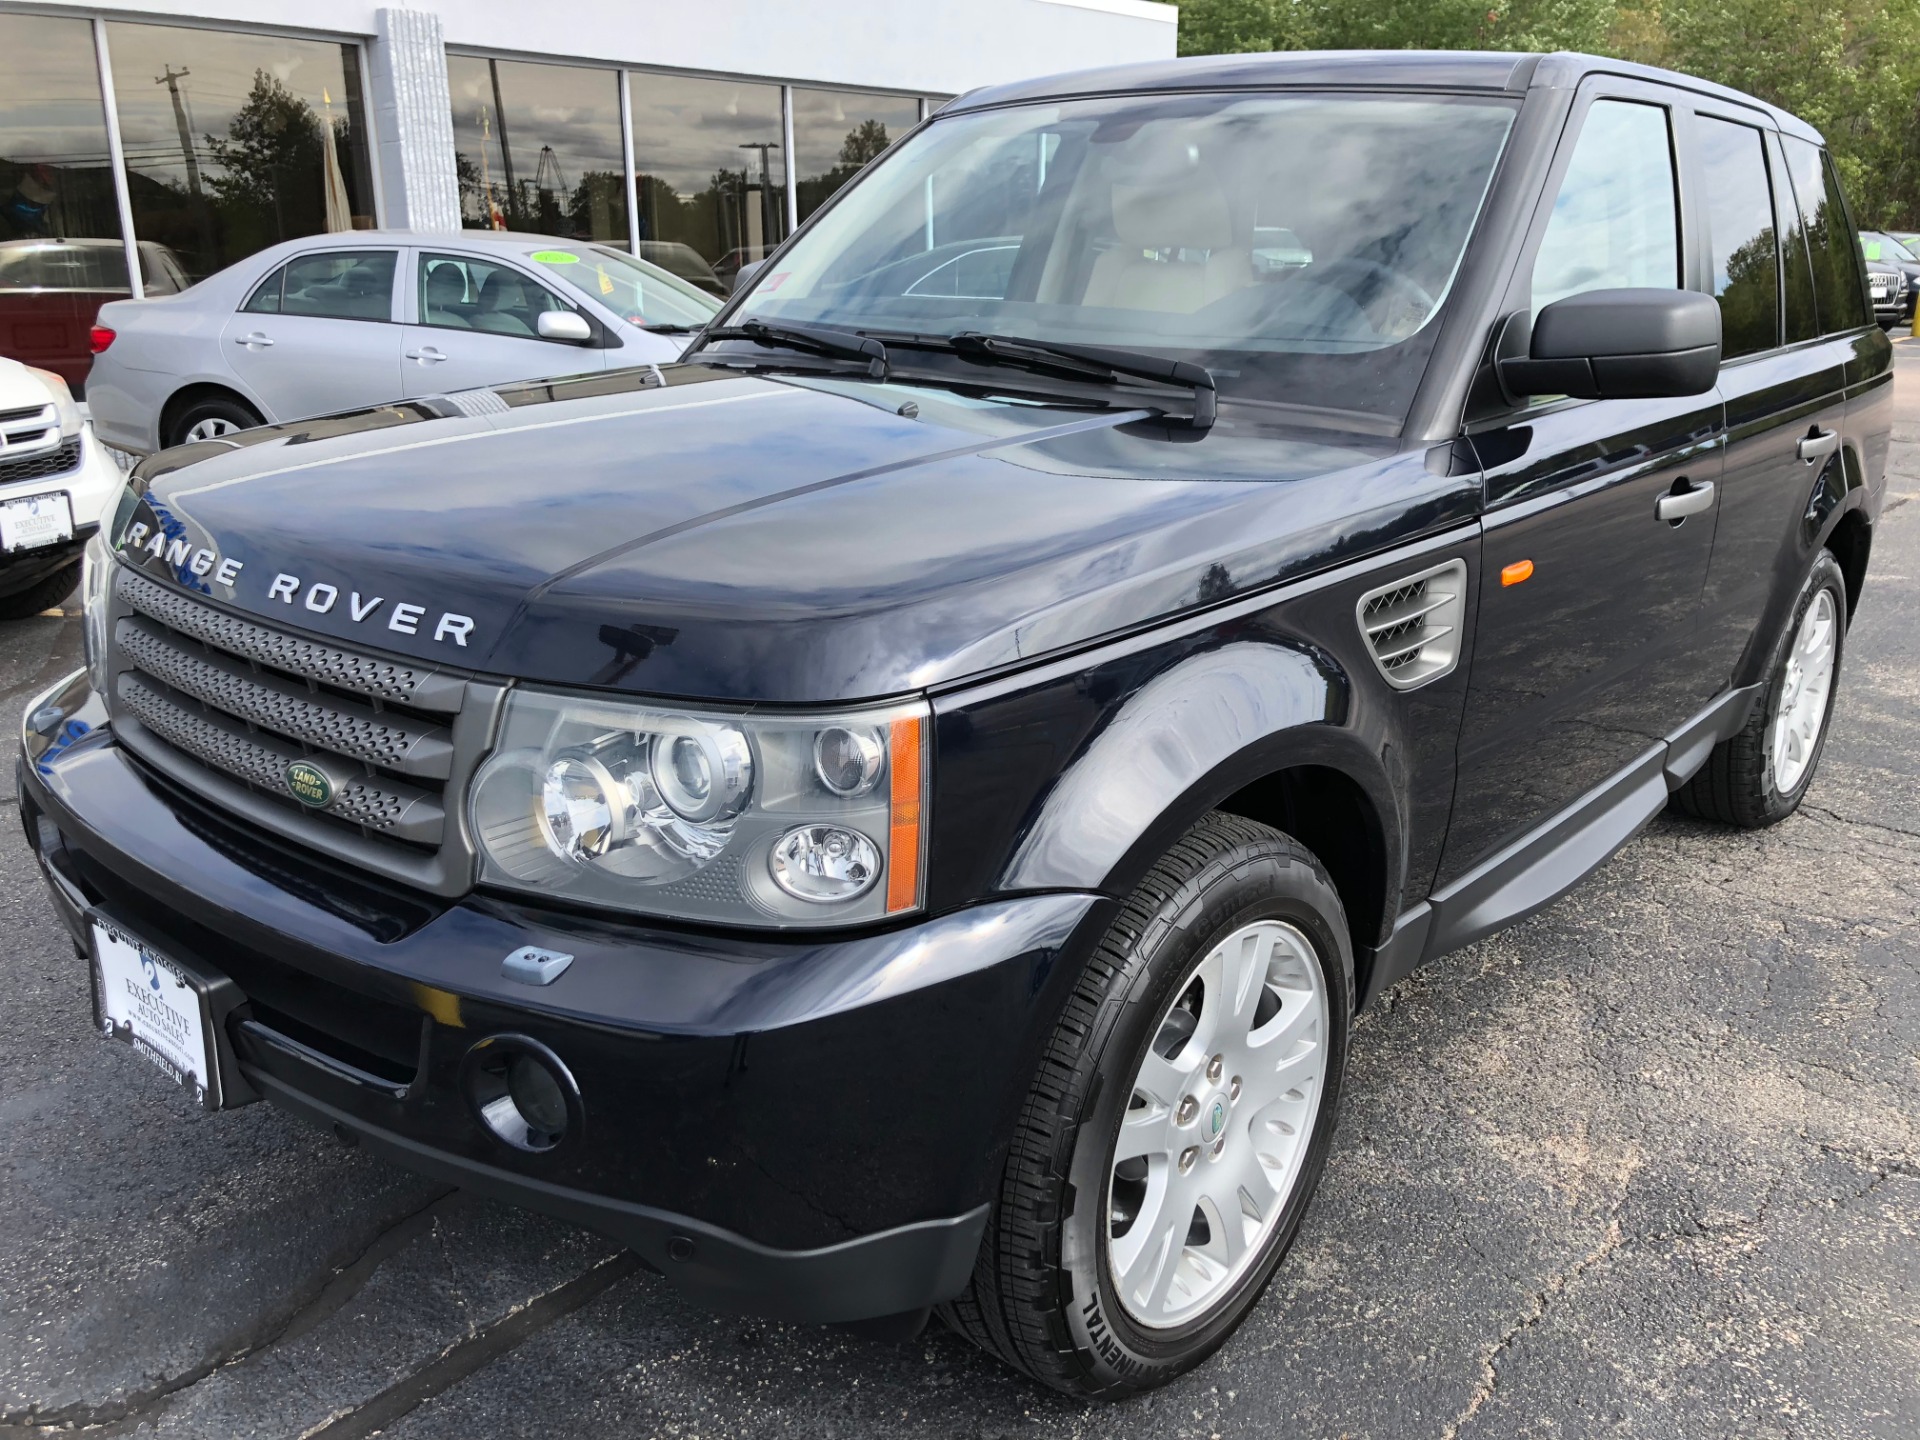 Used 2006 LAND ROVER RANGE ROVER SPO HSE For Sale (13,500